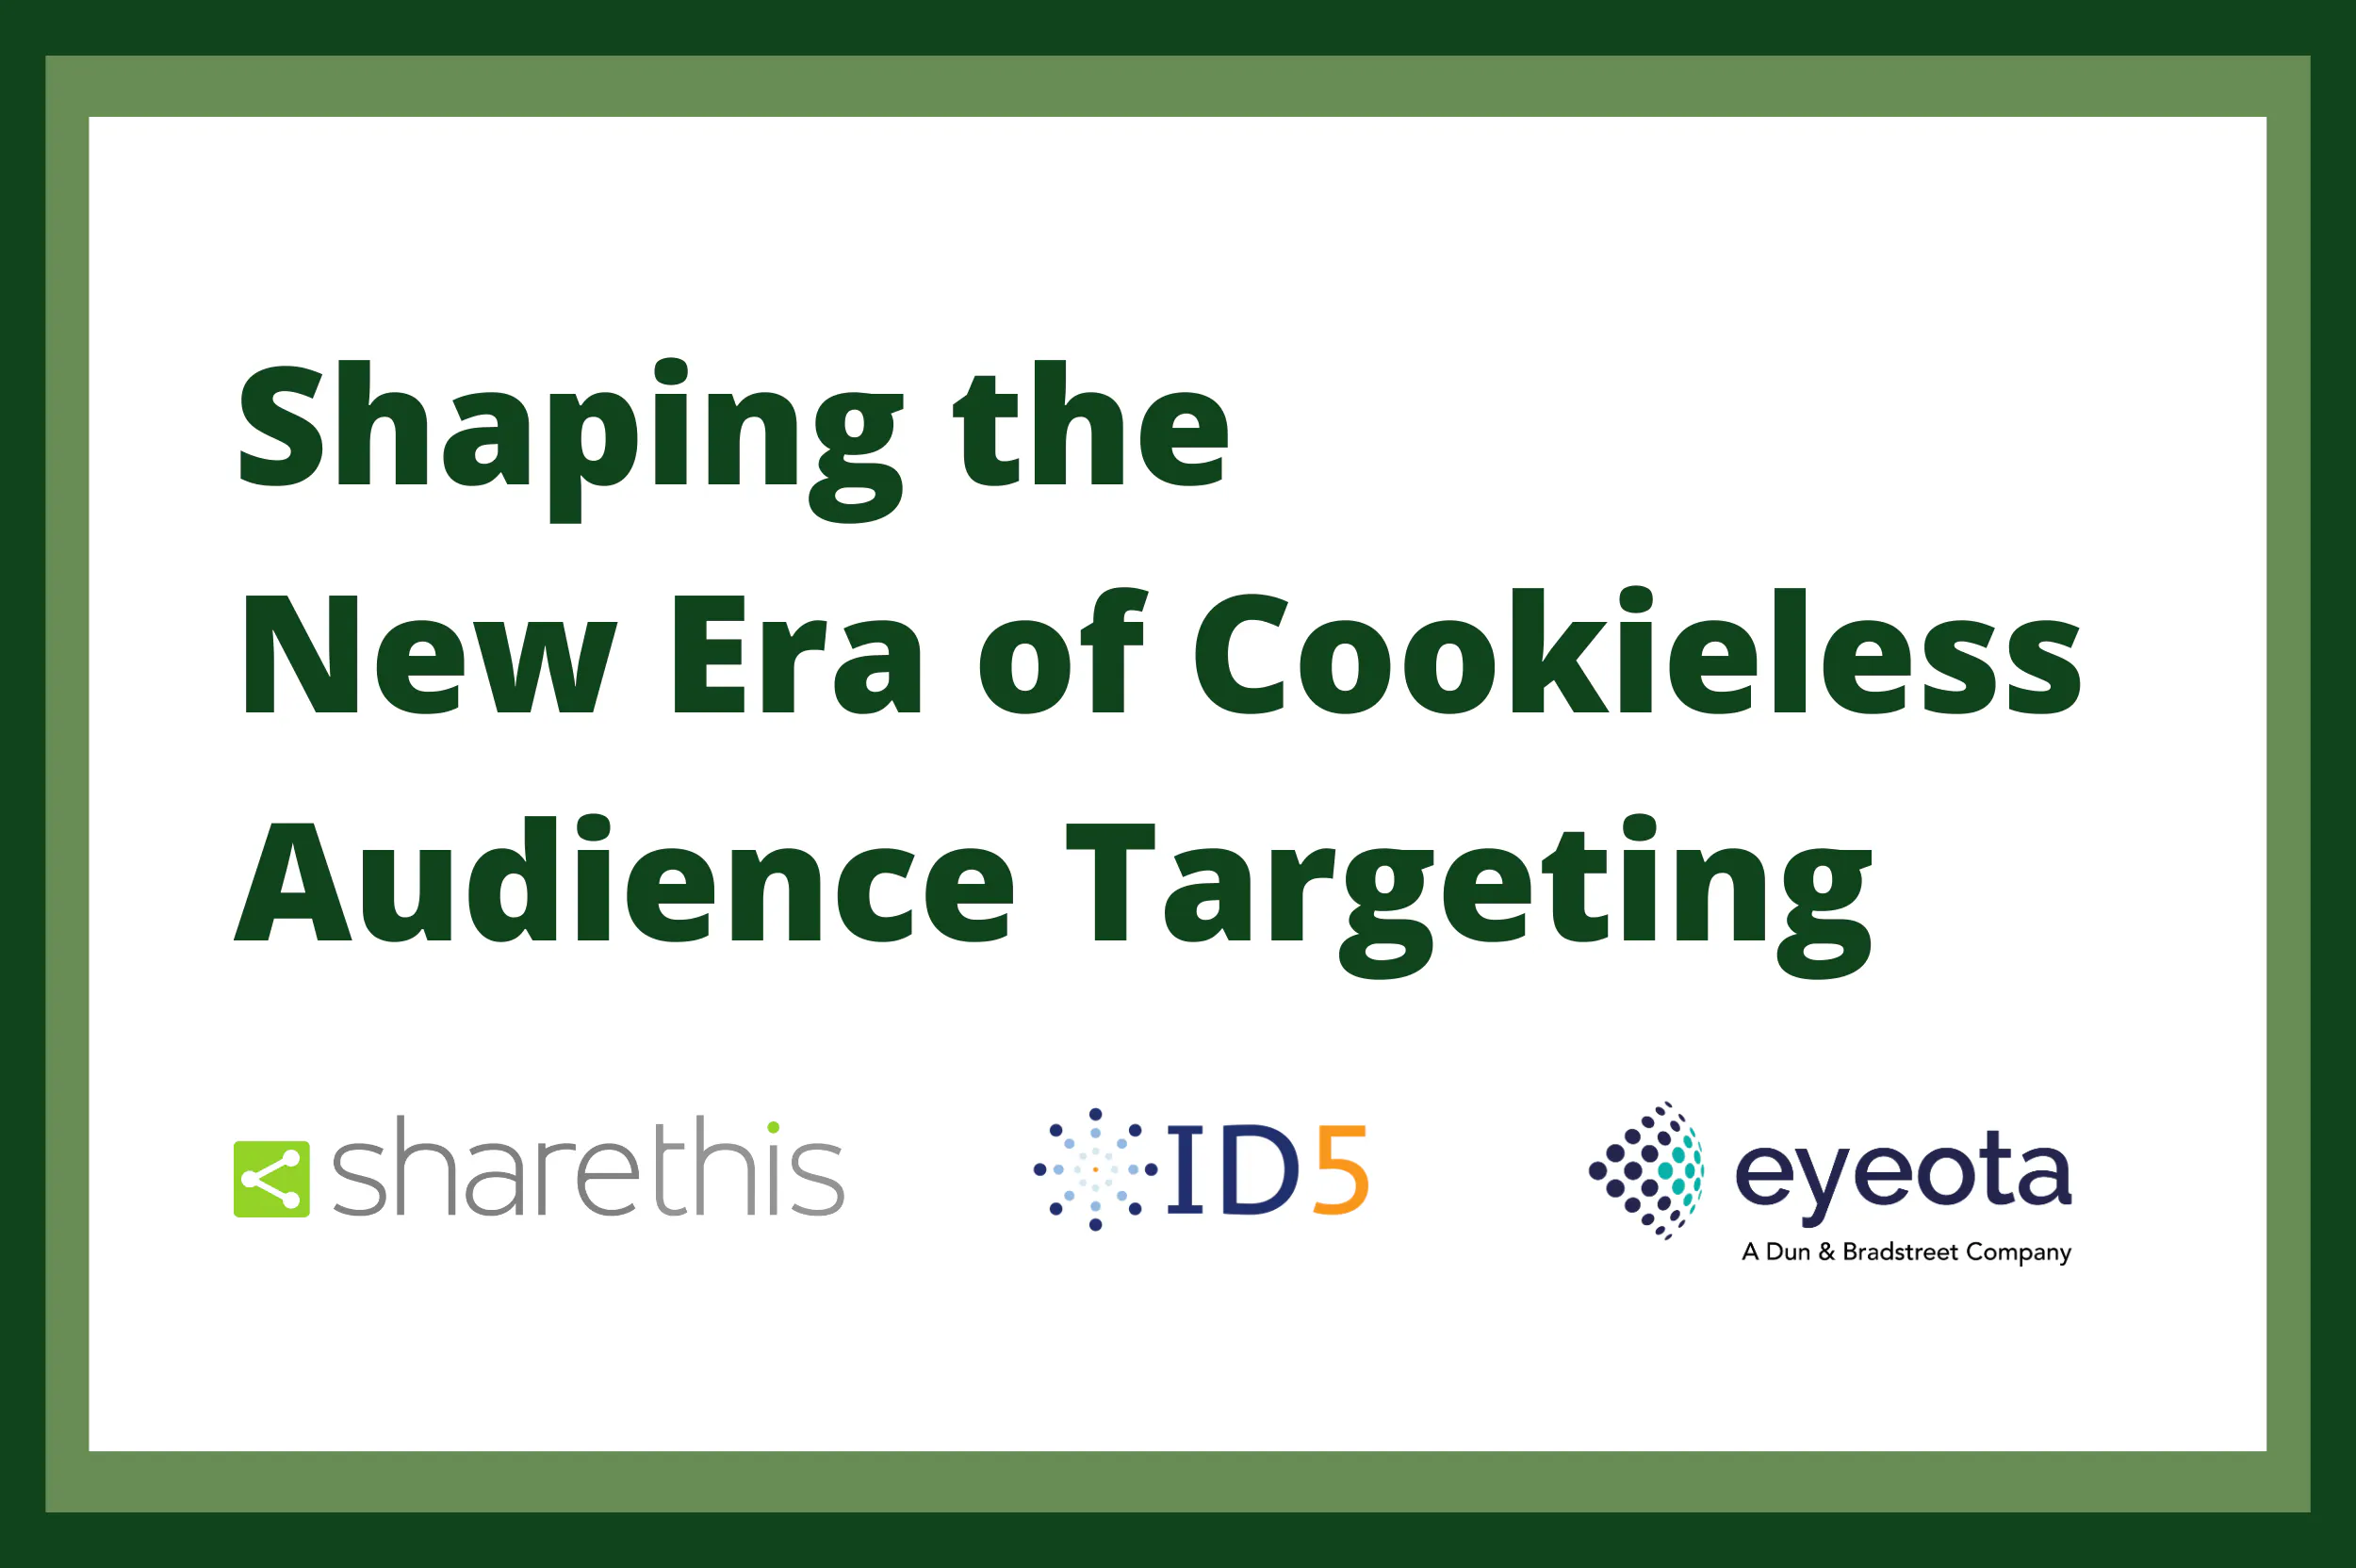 Shaping the New Era of Cookieless Audience Targeting